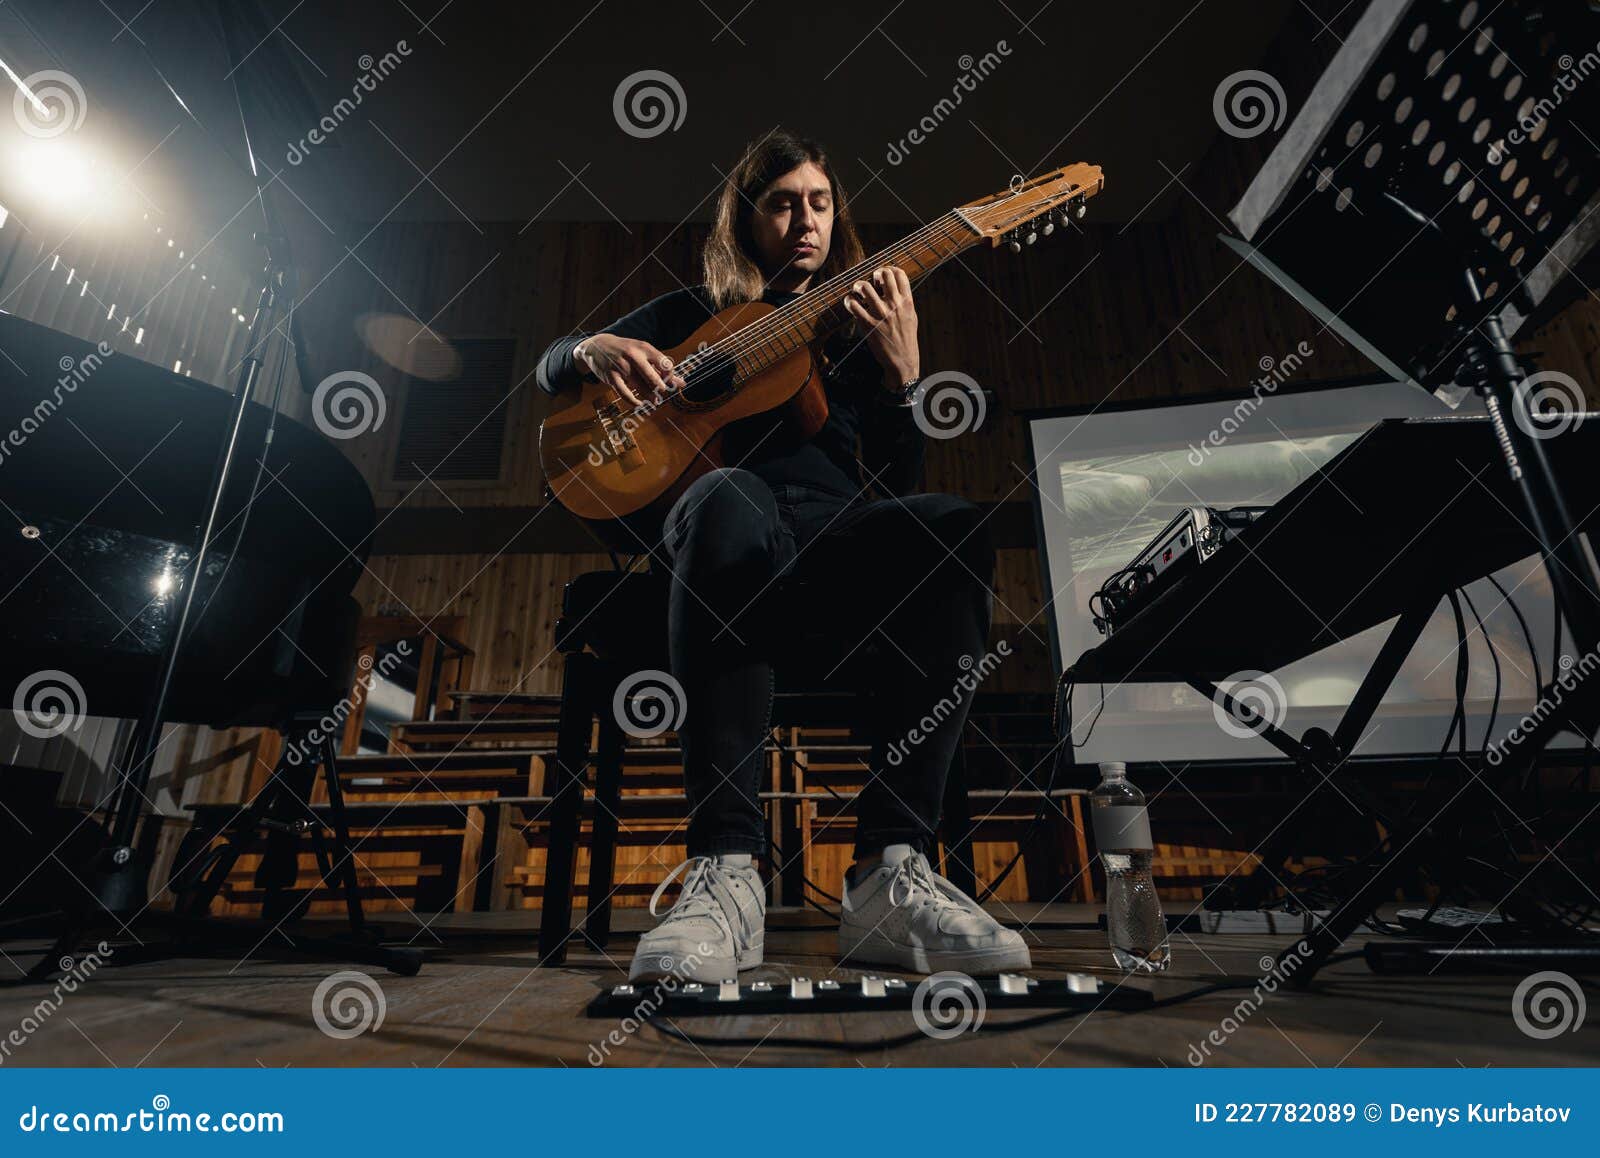 male guitarist on stage